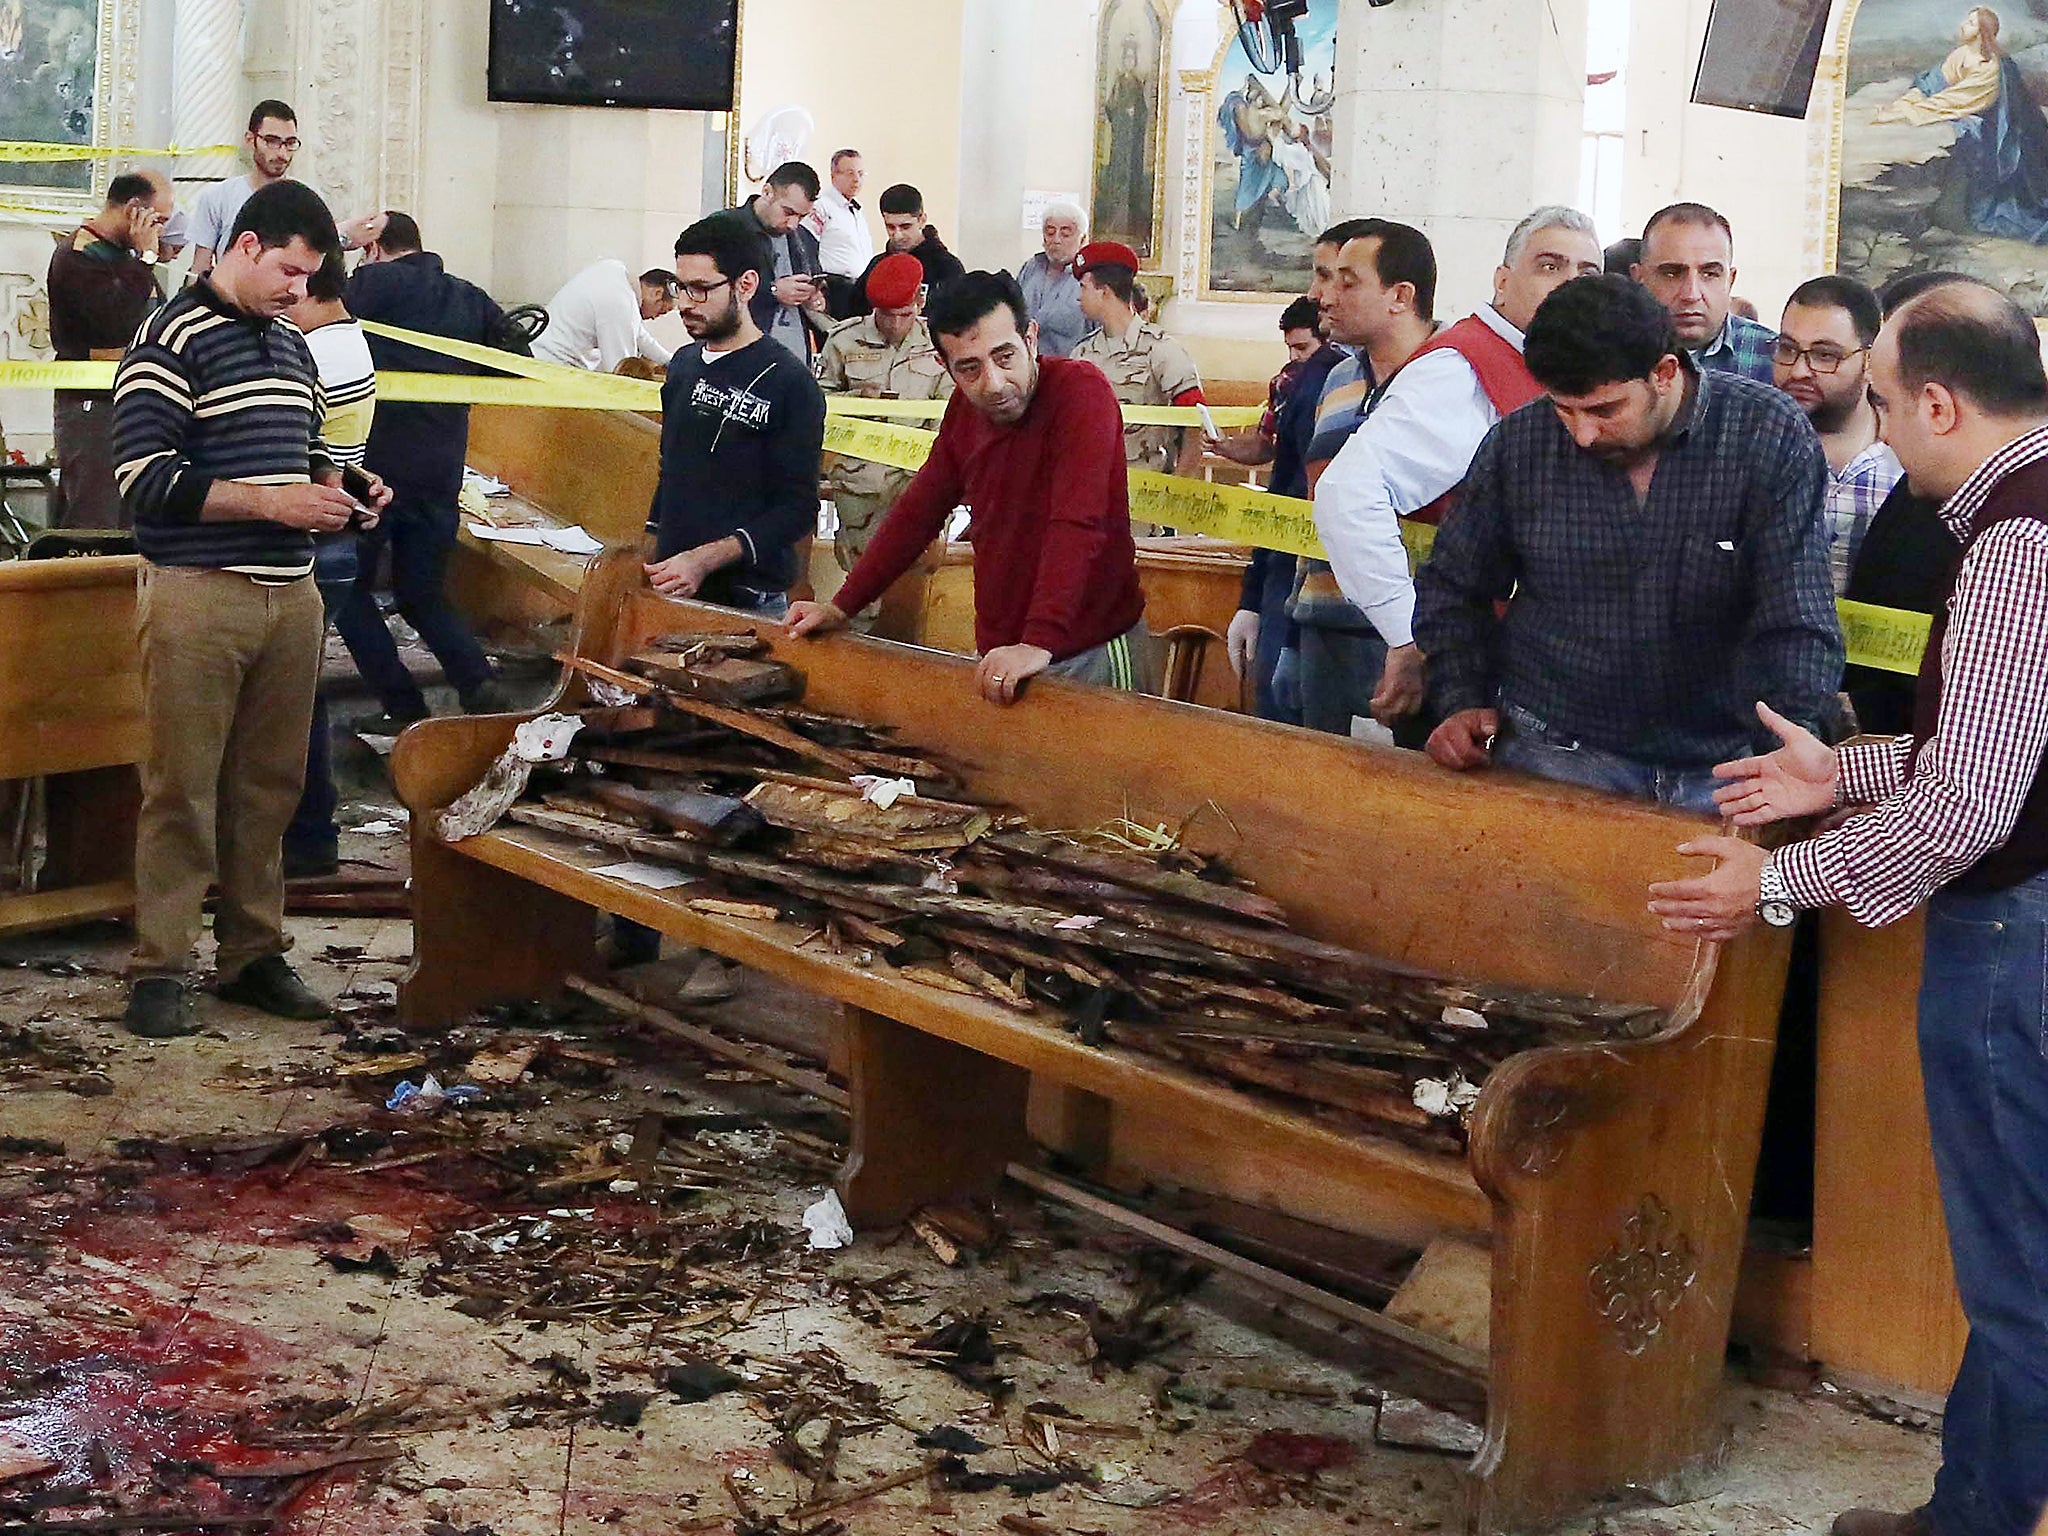 &#13;
Forensics collect evidence following the Palm Sunday bomb attack at the Mar Girgis Coptic Church &#13;